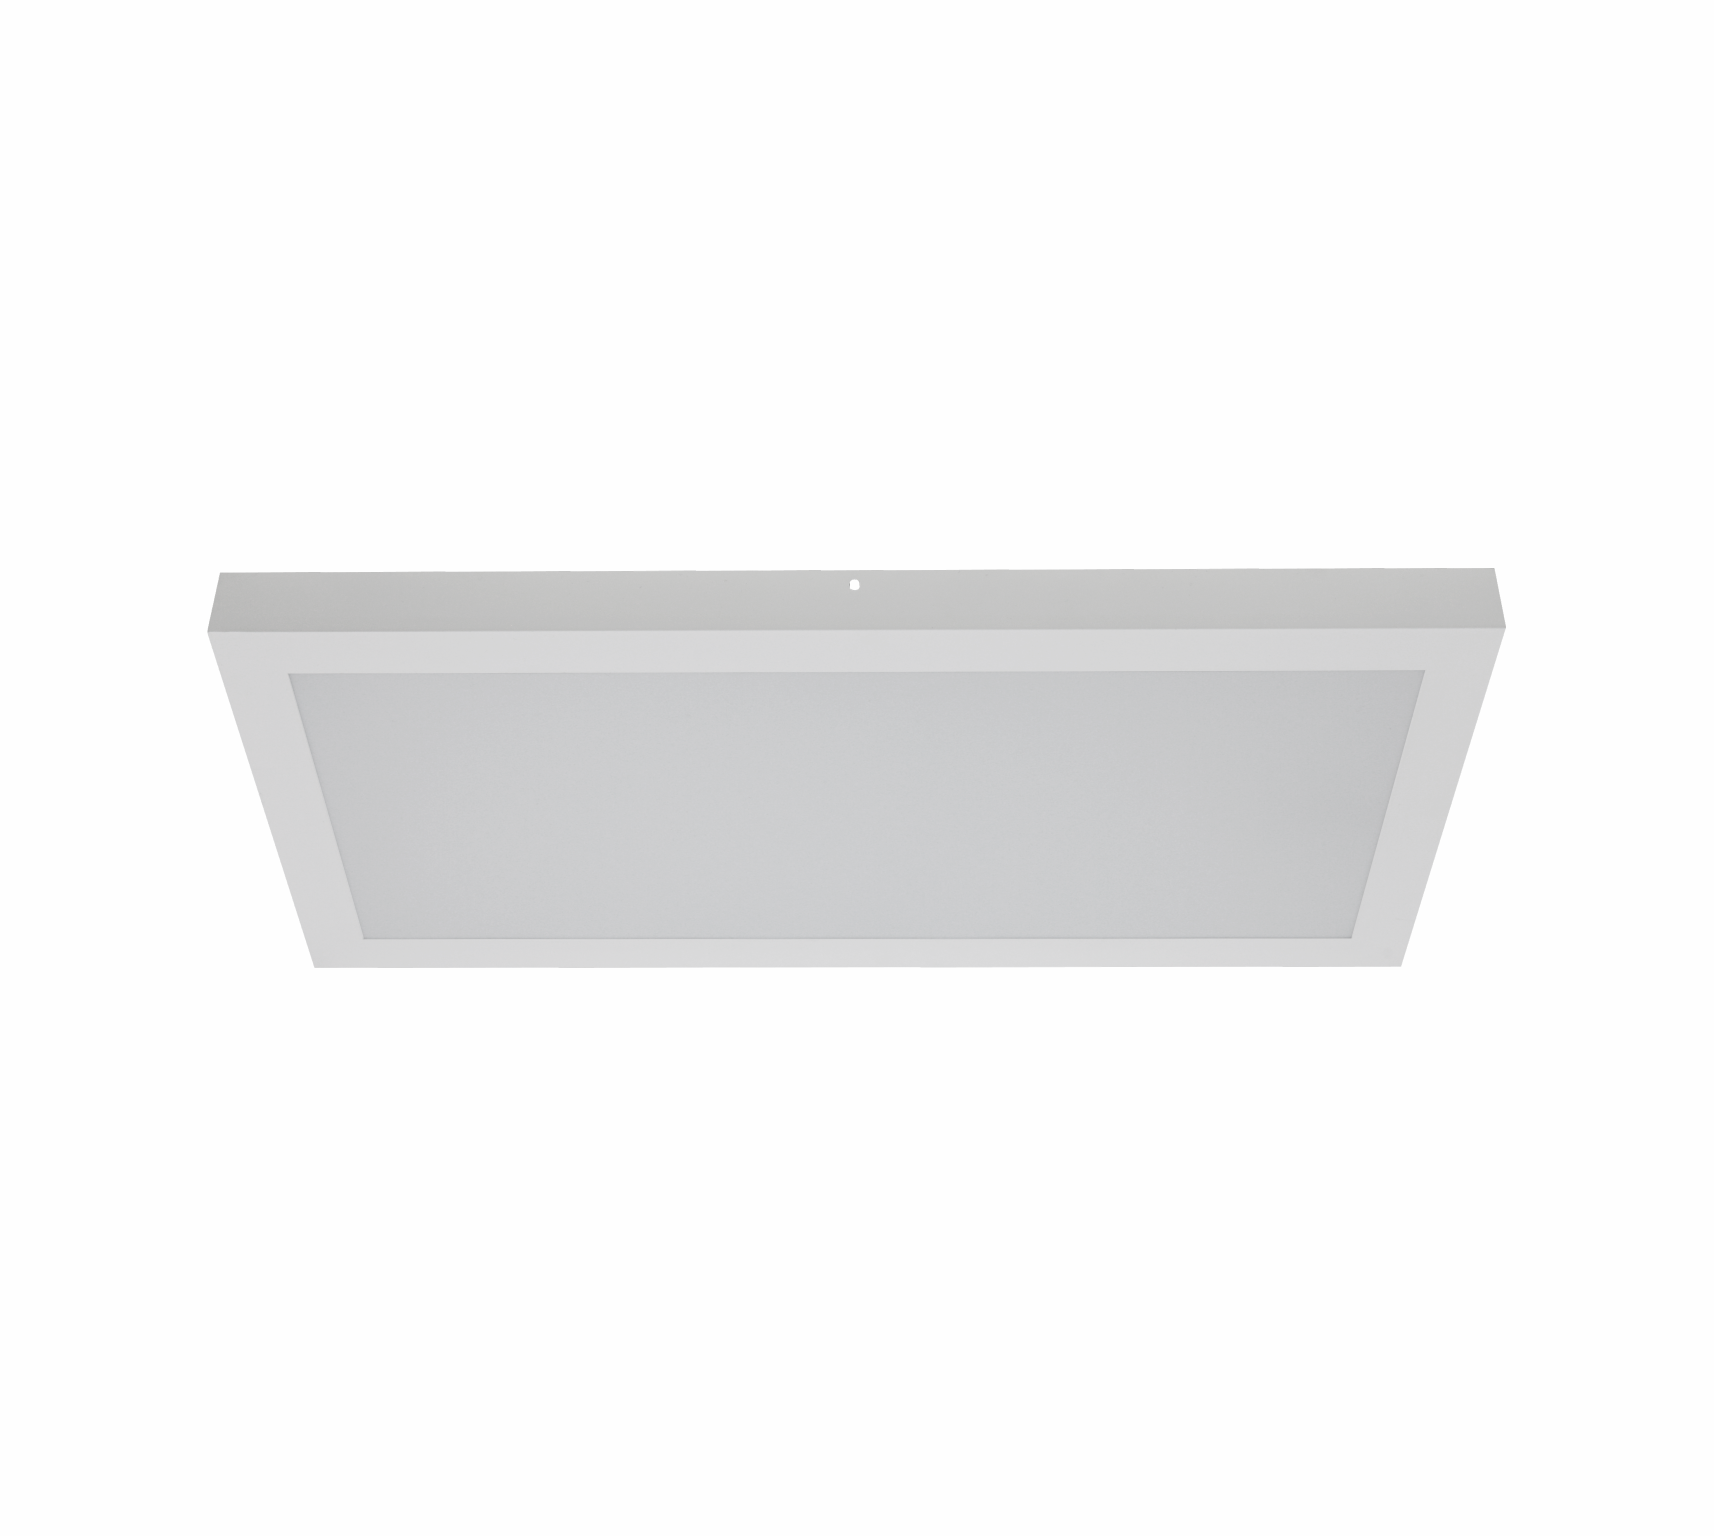 PAINEL-BACKLIGHT-LED-P-RT-620S-24-40-3C <span>(caixa)</span><br/>